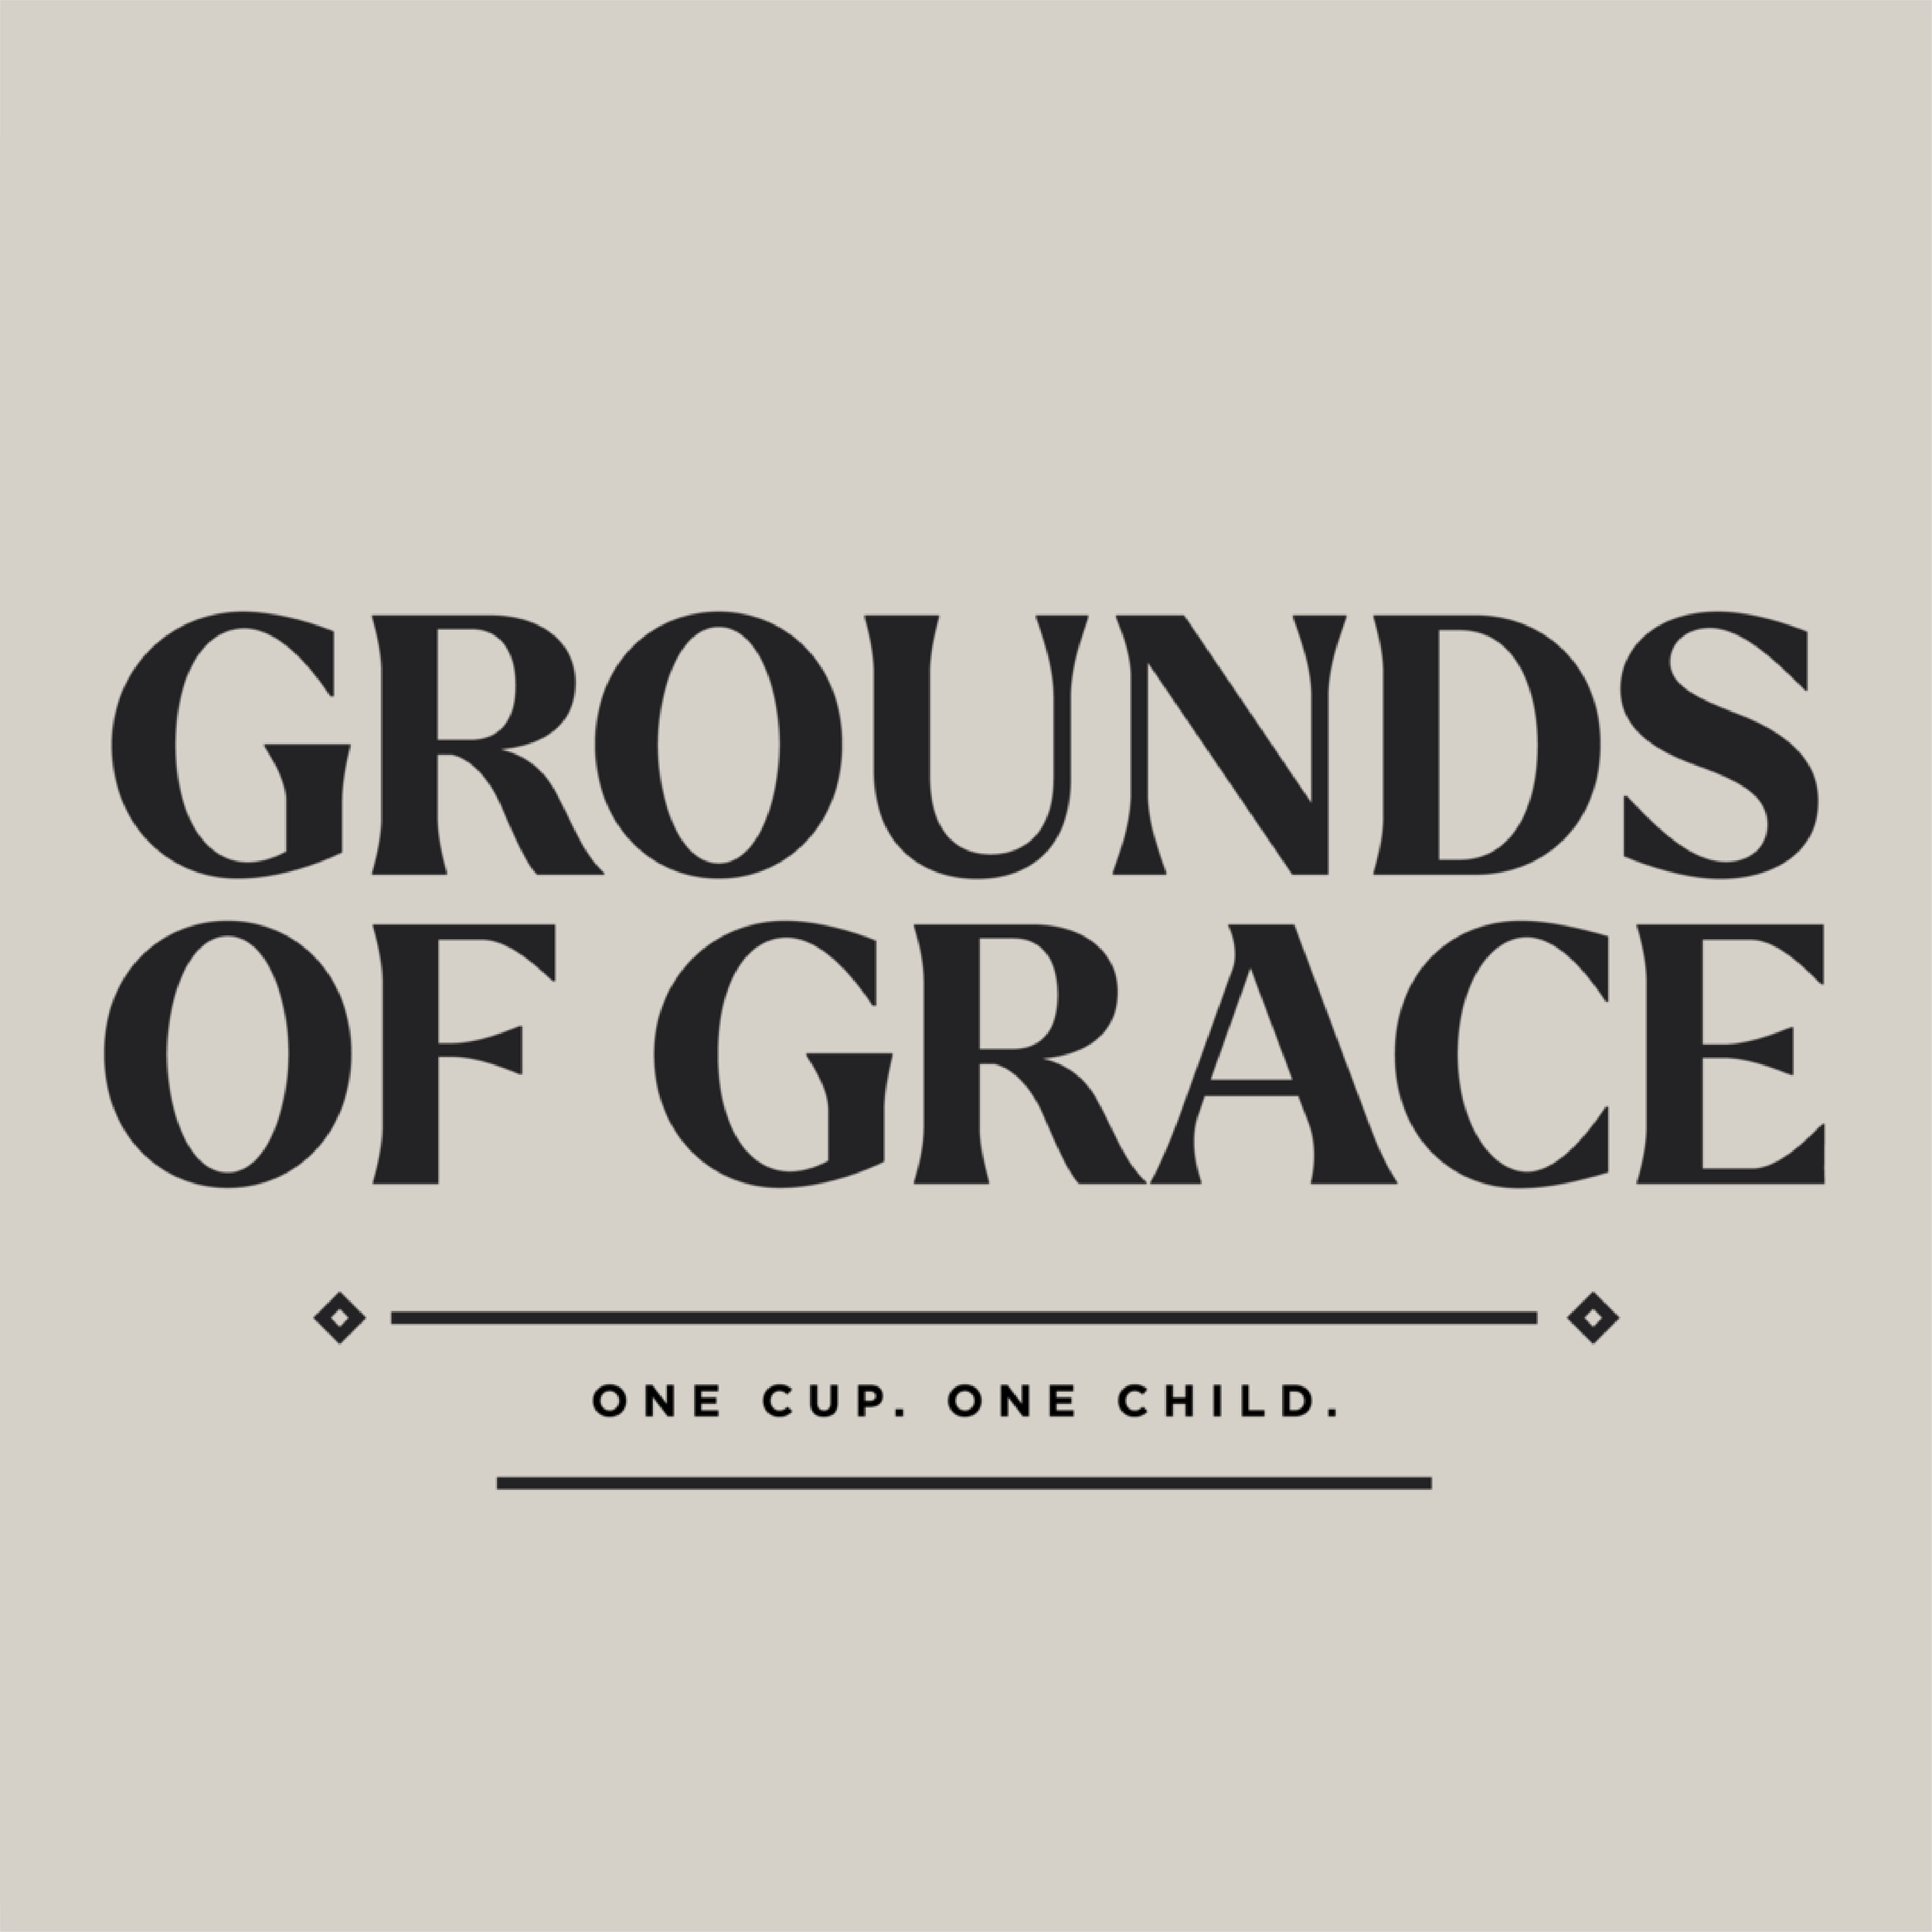 Grounds of Grace